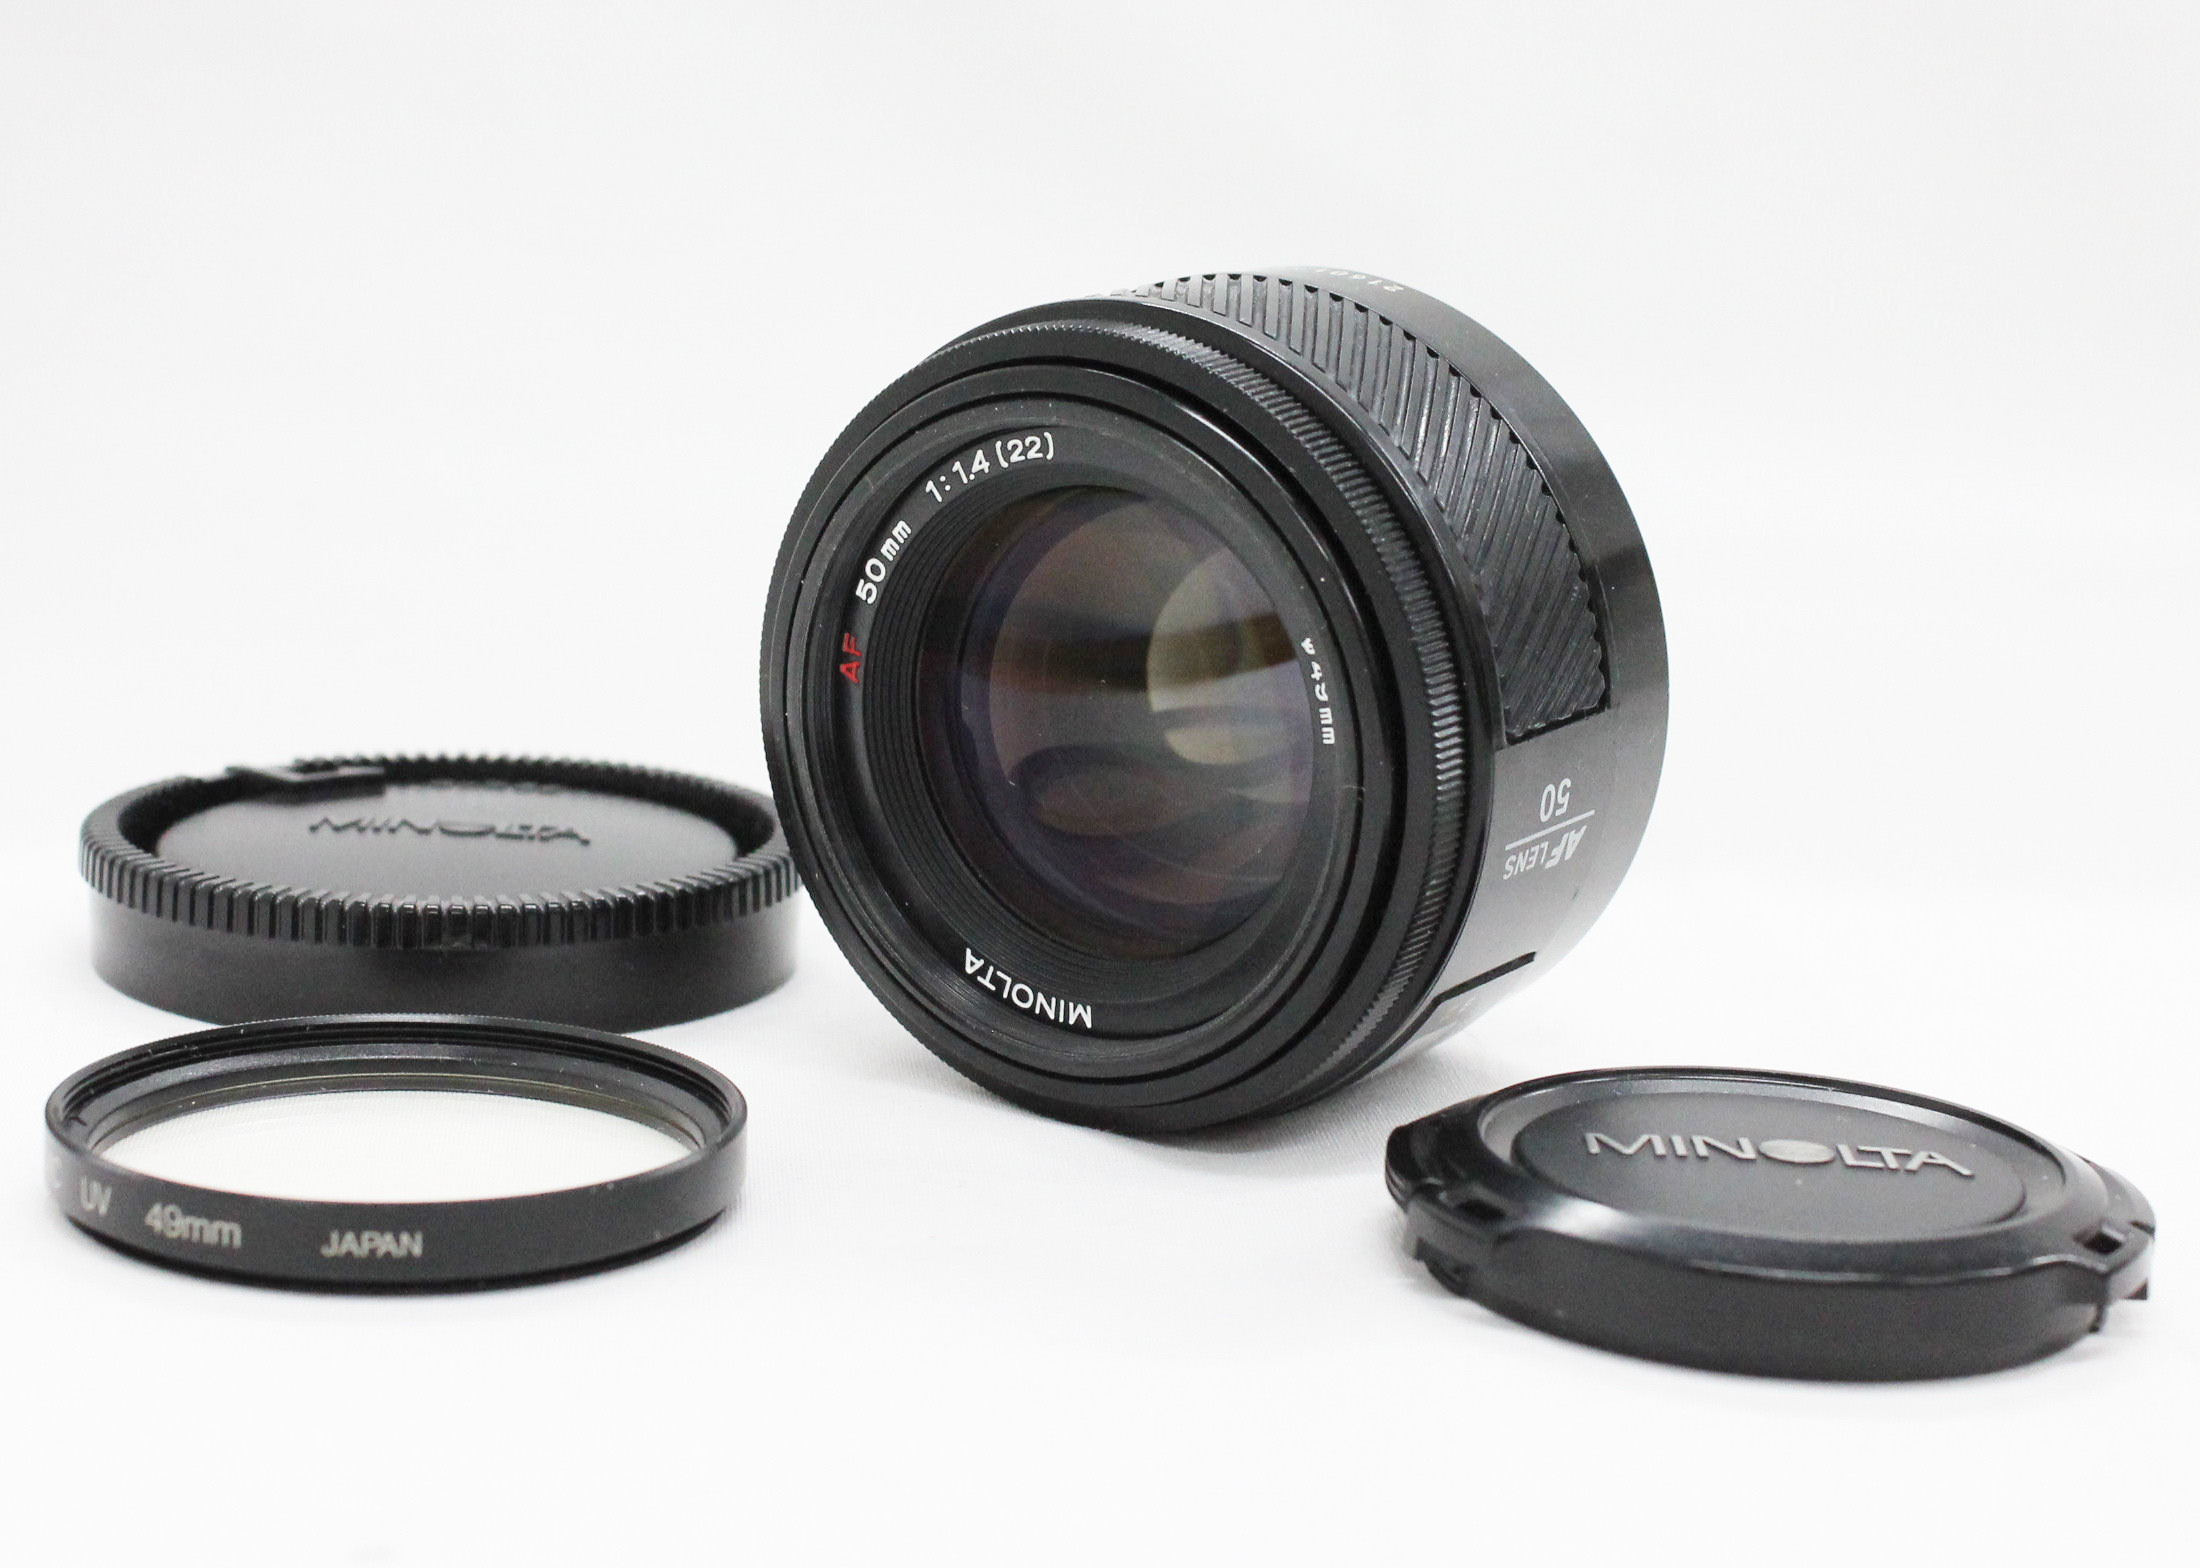 Japan Used Camera Shop | [Near Mint] Minolta AF 50mm F/1.4 Lens for Sony Minolta A-mount from Japan